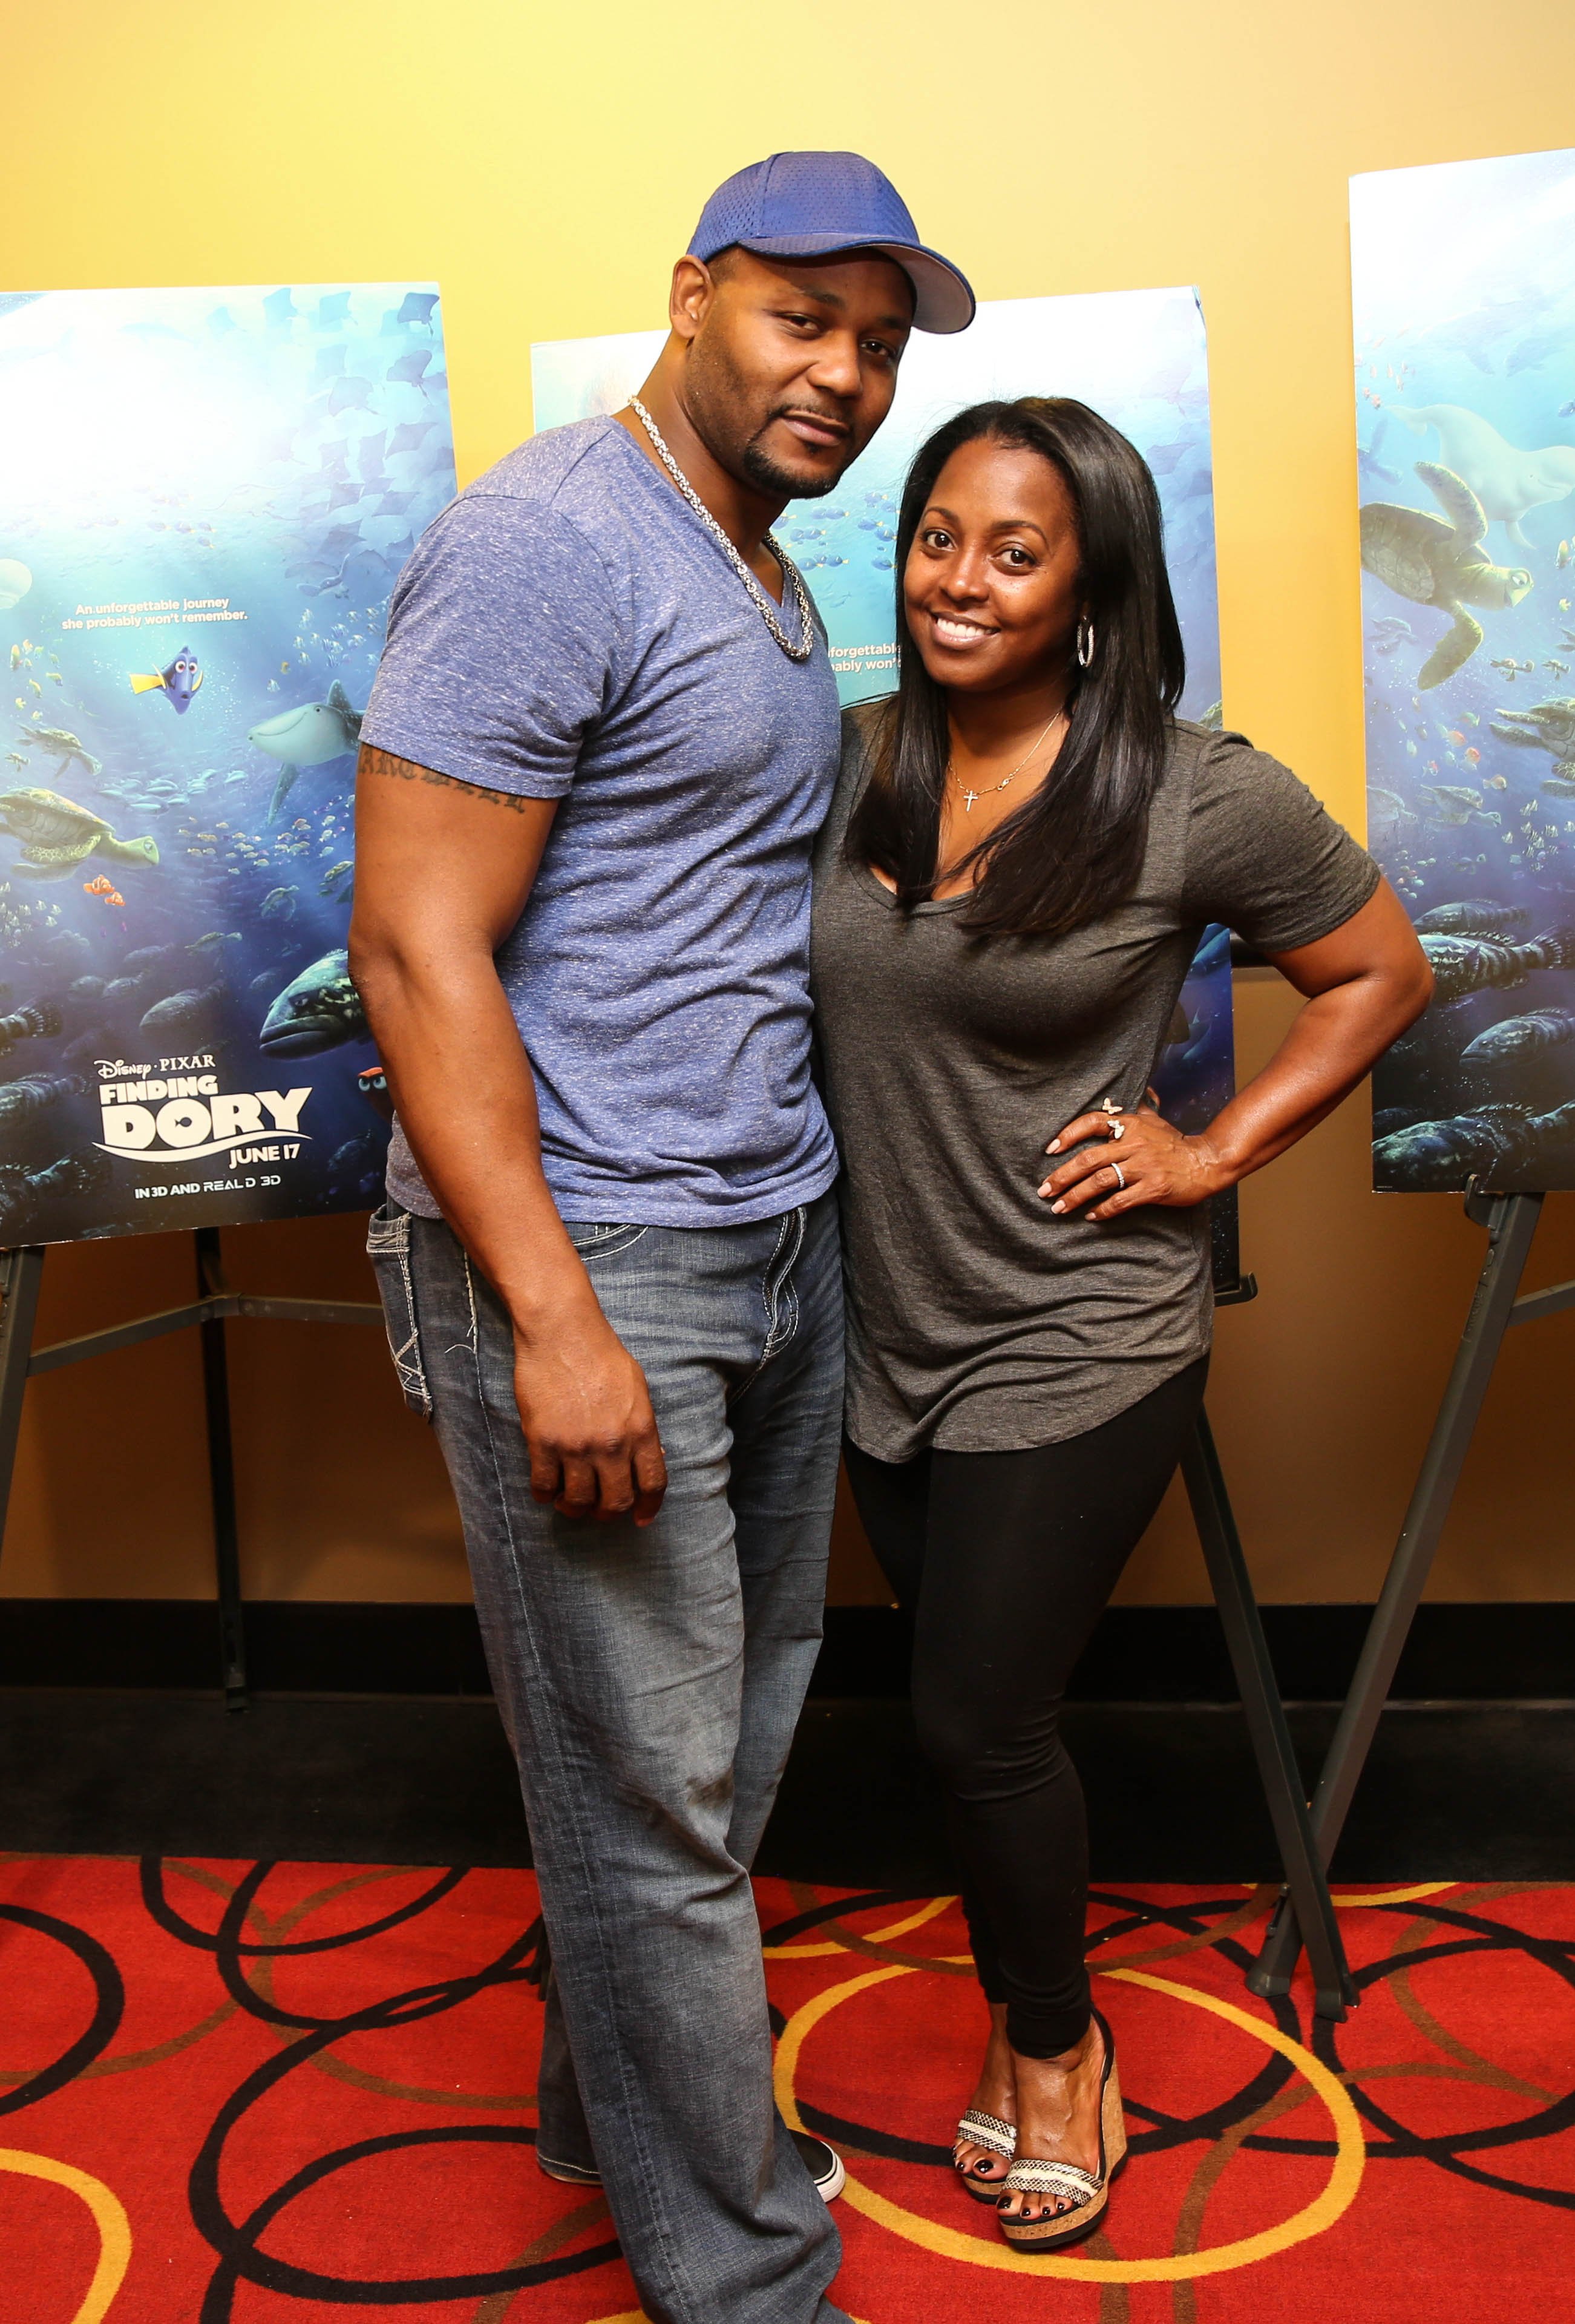 Keshia Knight Pulliam & Ed Hartwell at the advanced screening of “Finding Dory” in June 2016. | Photo: Getty Images